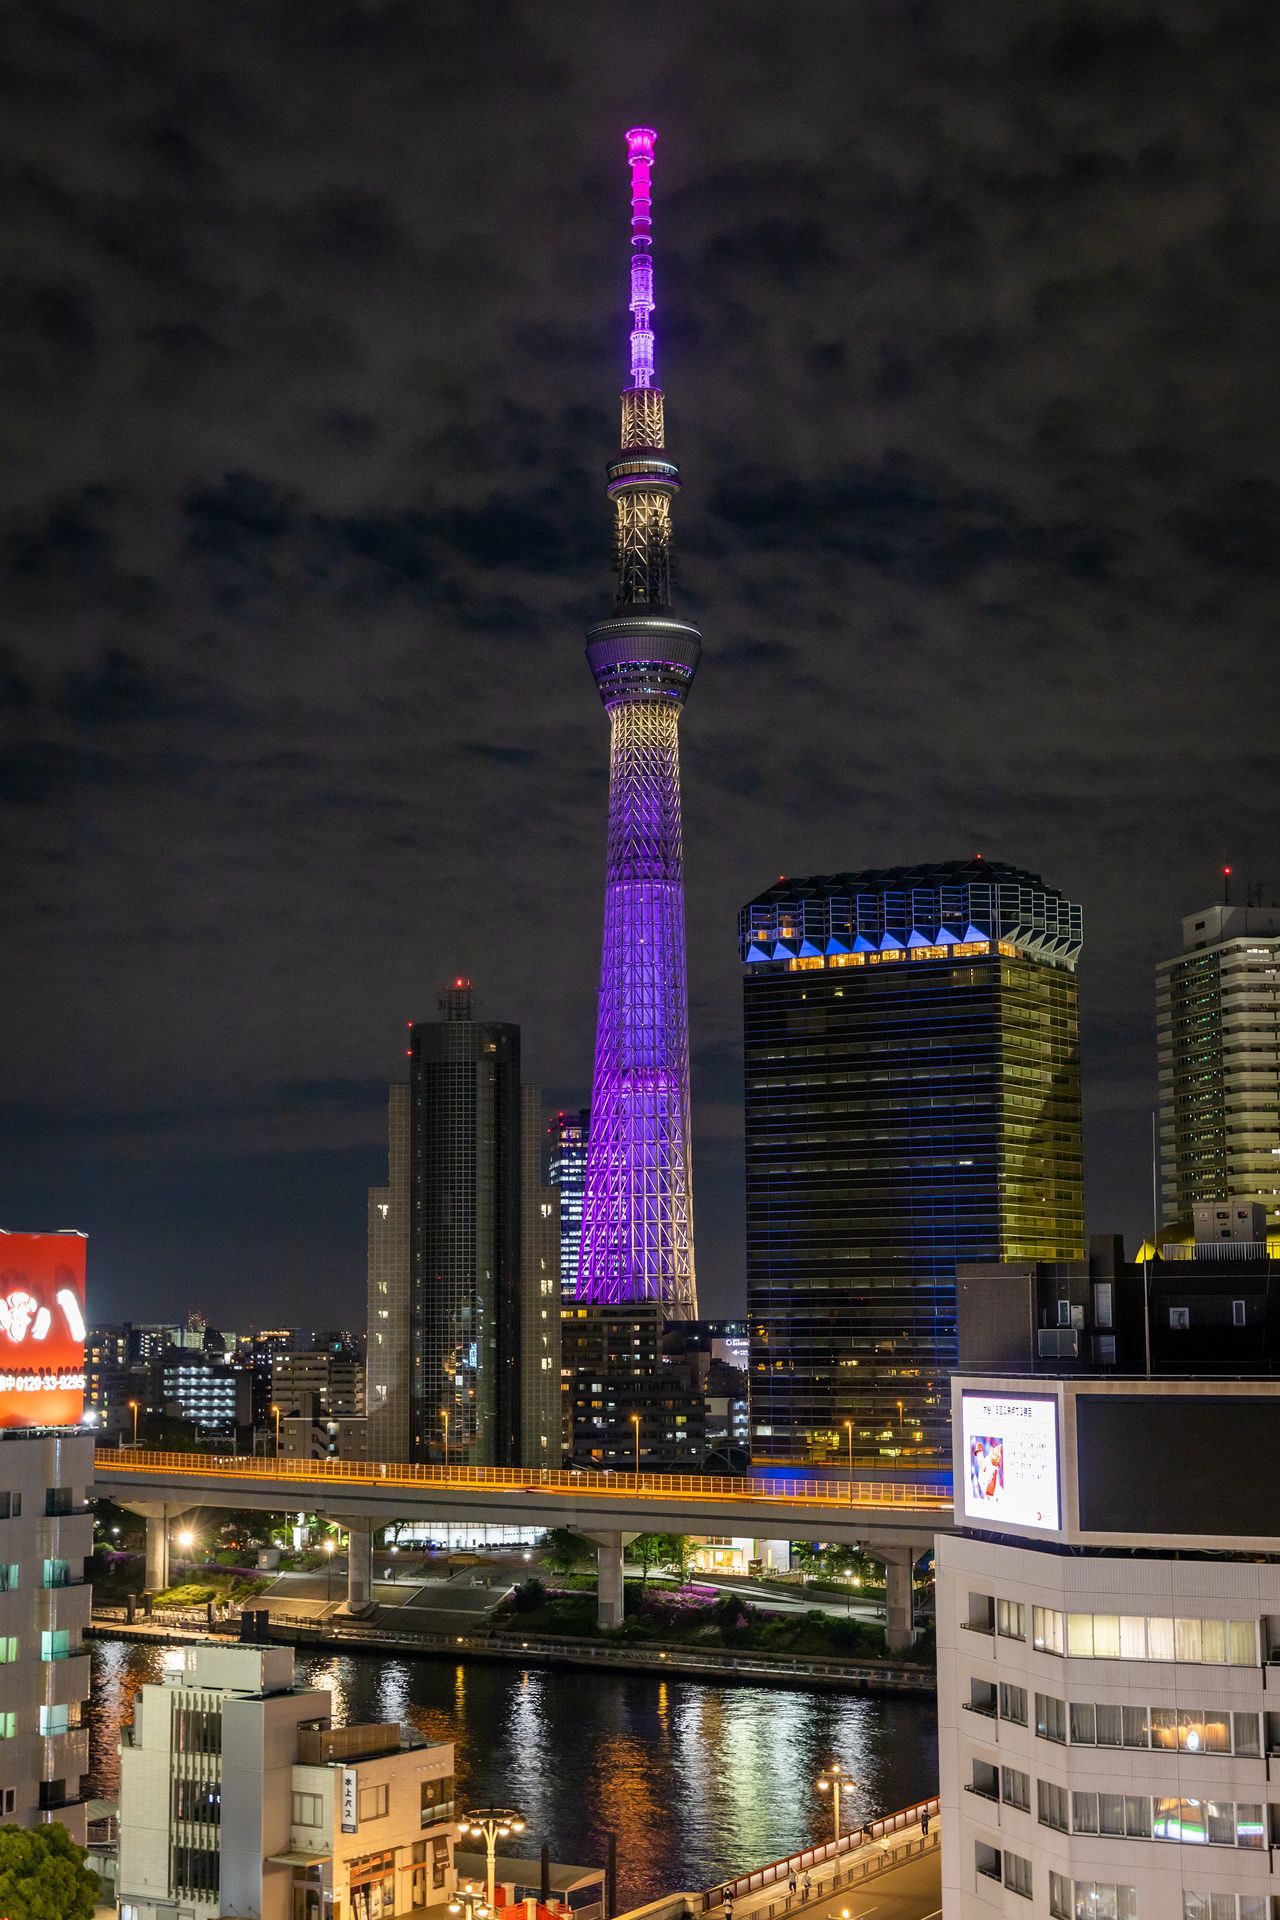 Newly-installed downward-facing projectors enhance illumination. The miyabi lighting theme is seen here from the rooftop terrace of the Asakusa Culture Tourist Information Center.